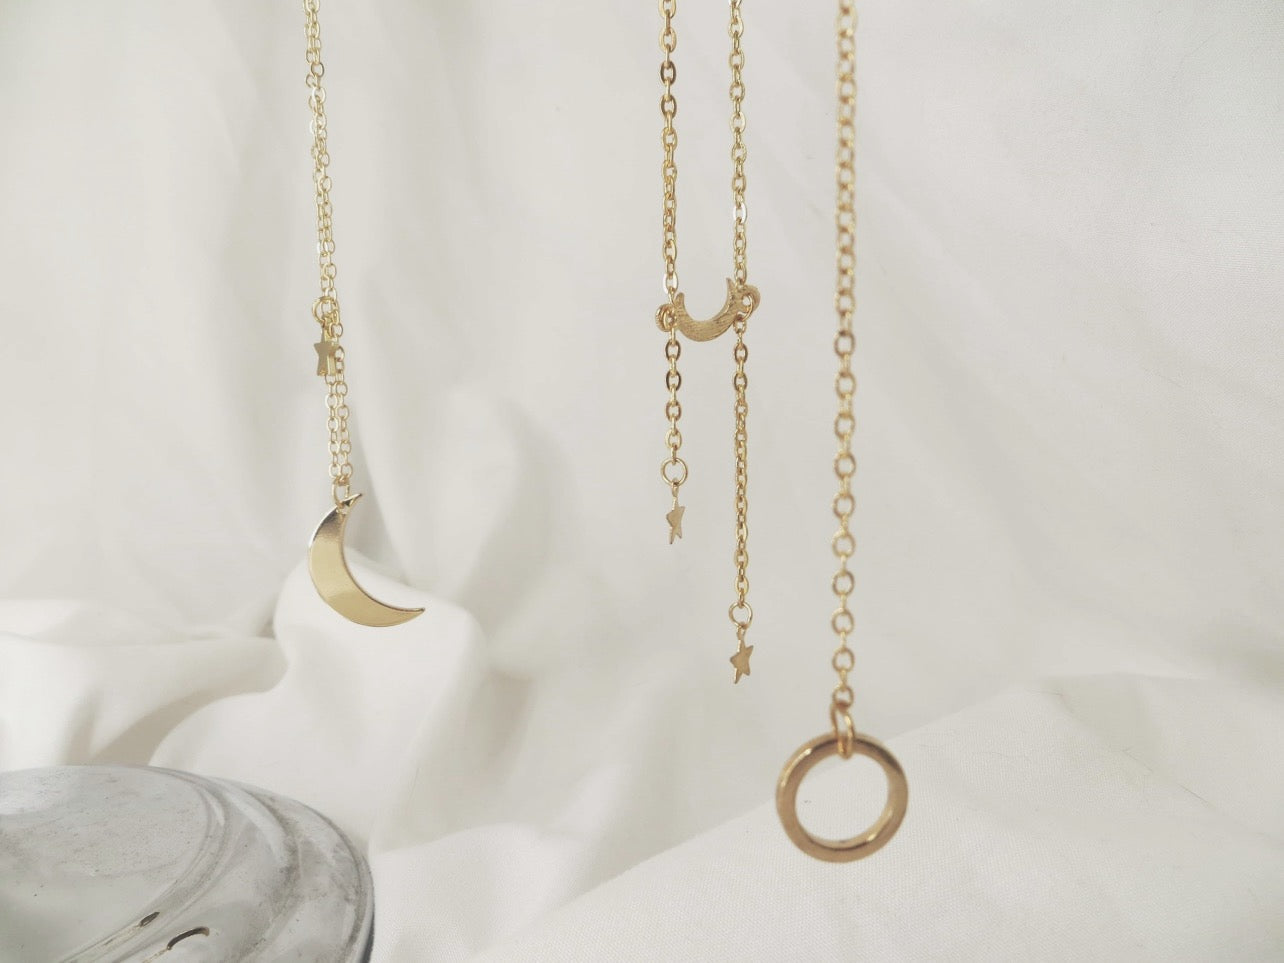 Planetary Array of Necklaces